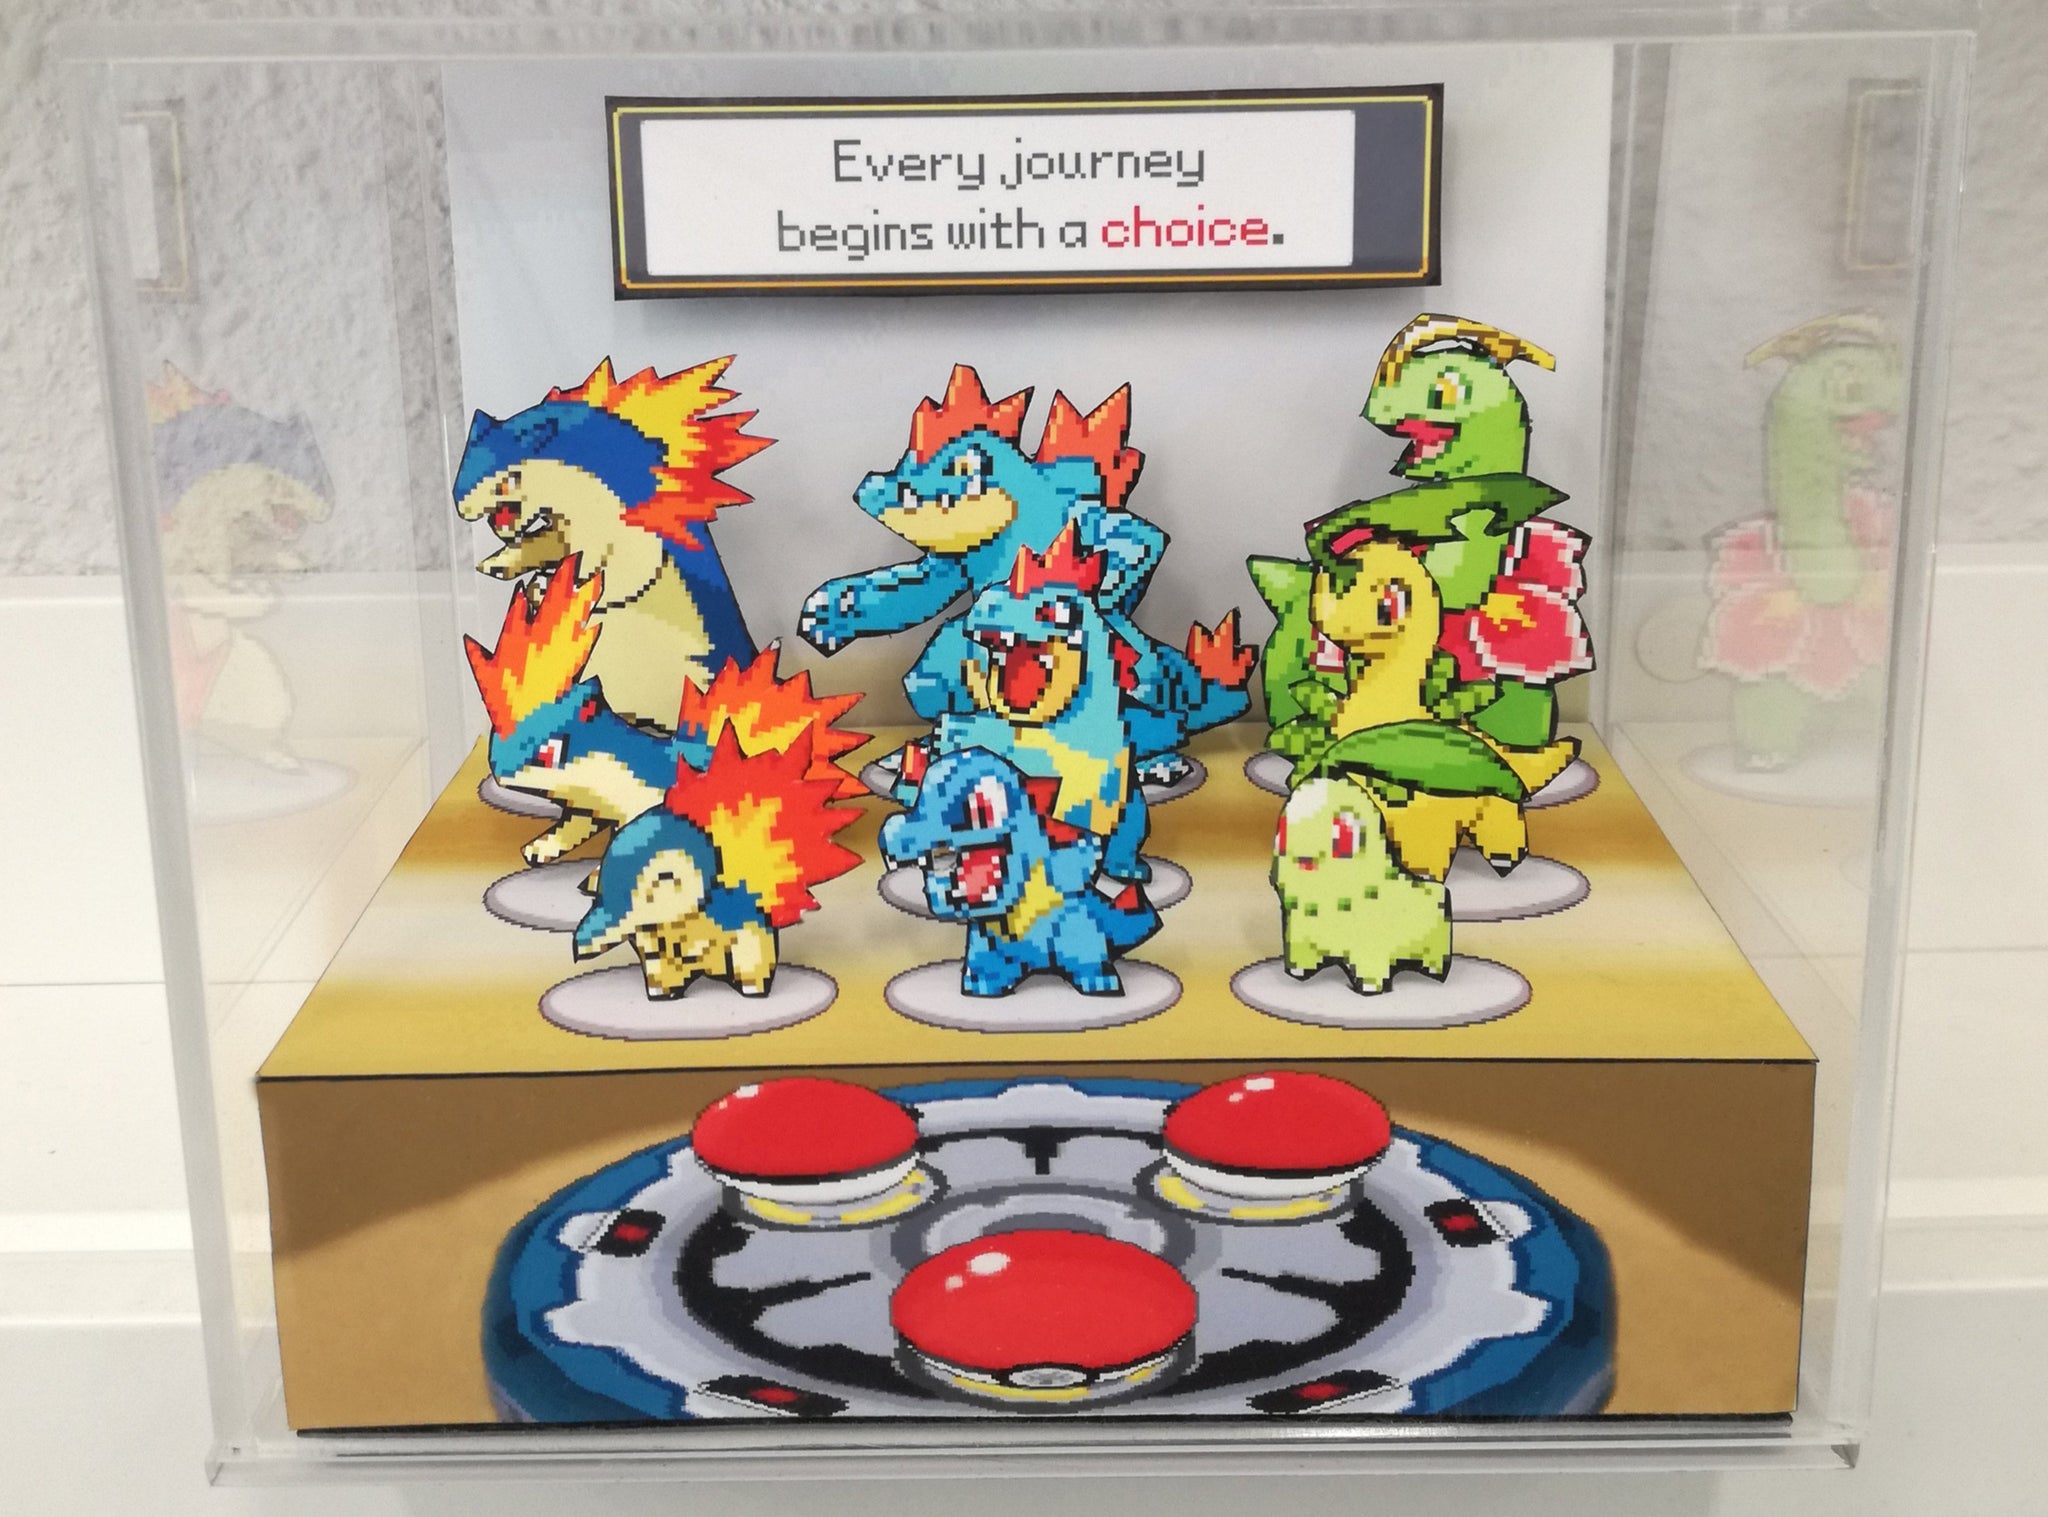 Pokemon Soul Silver/Heart Gold Red Battle Cubic Diorama – ARTS-MD